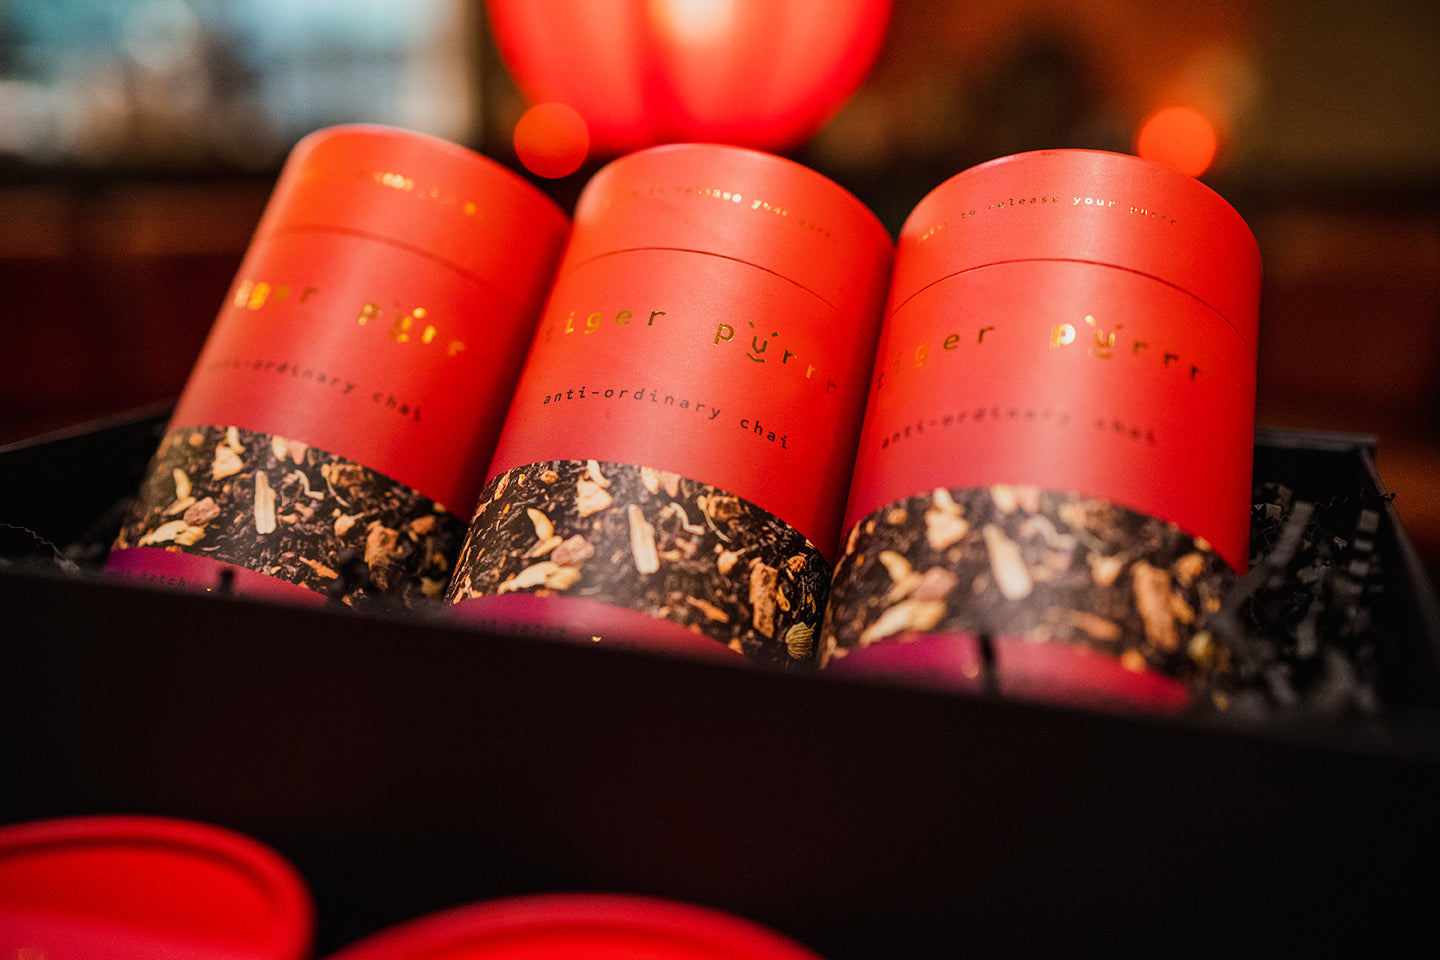 Tiger Purrr chai launch event at Red Lantern restaurant in collaboration with The Luxury Network